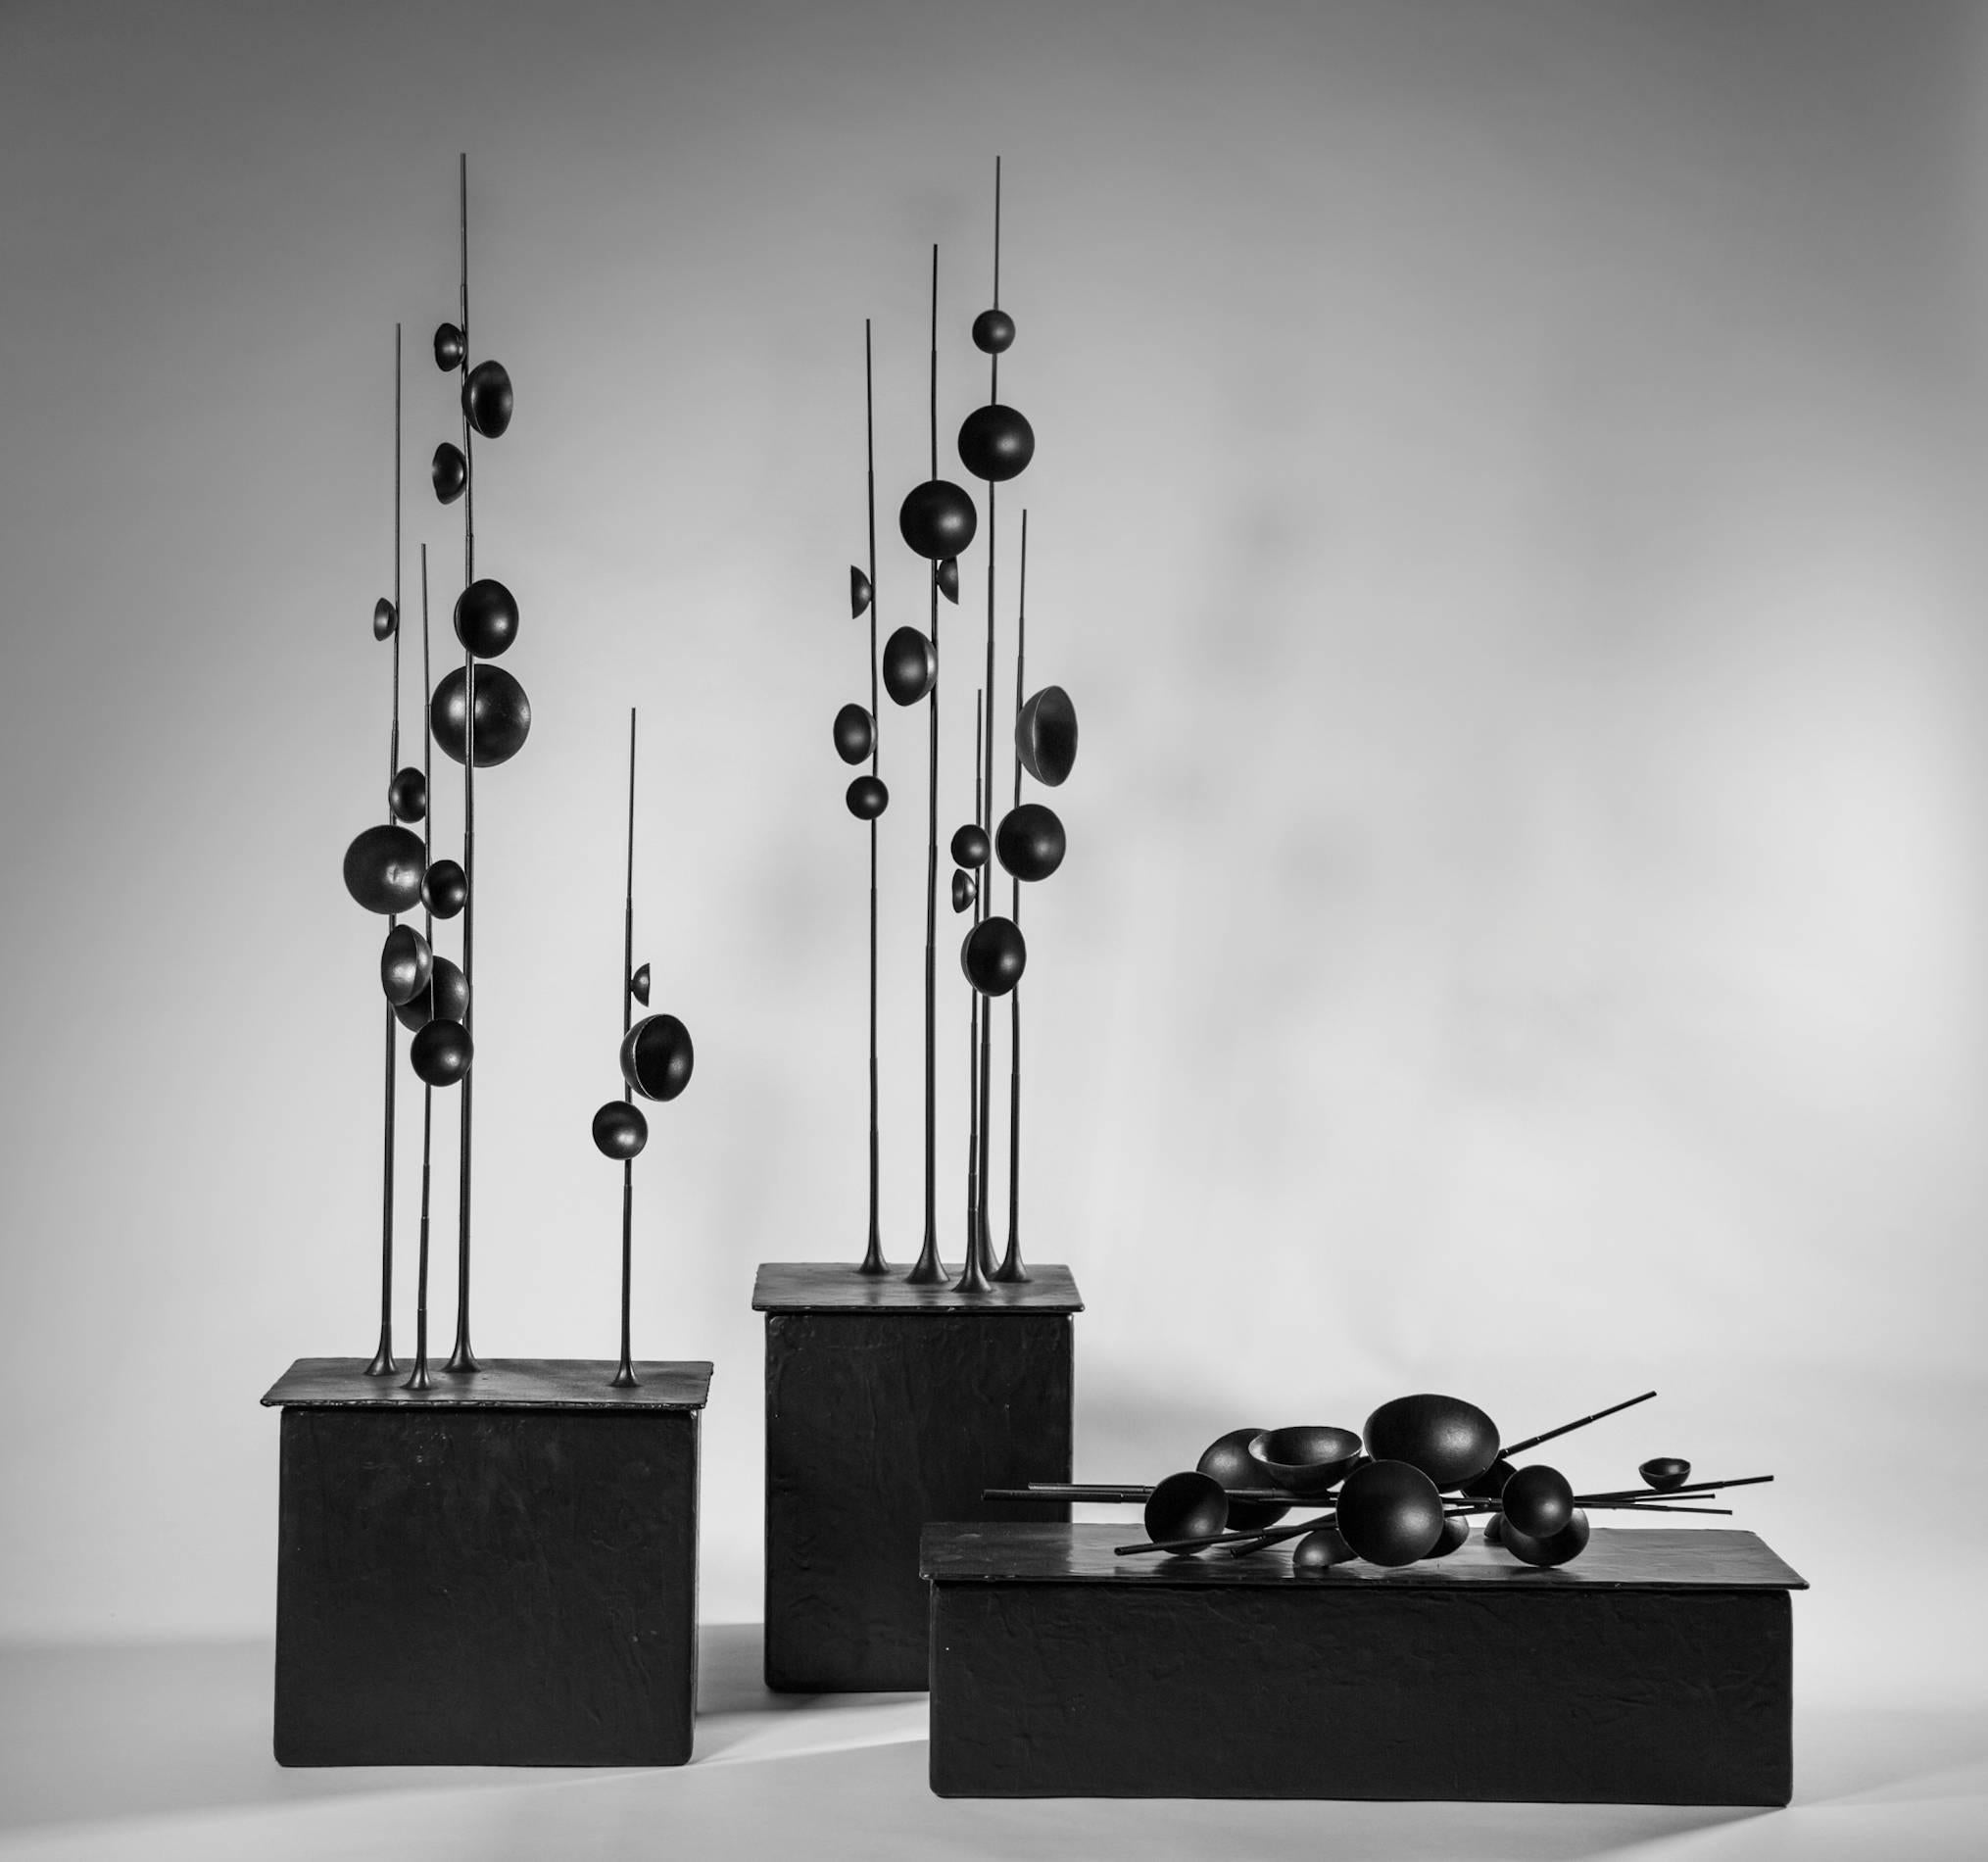 Blossfeldt Station II [Lidded box - aerospace rubber coated gilding metal] - Gray Abstract Sculpture by Tom Palmer